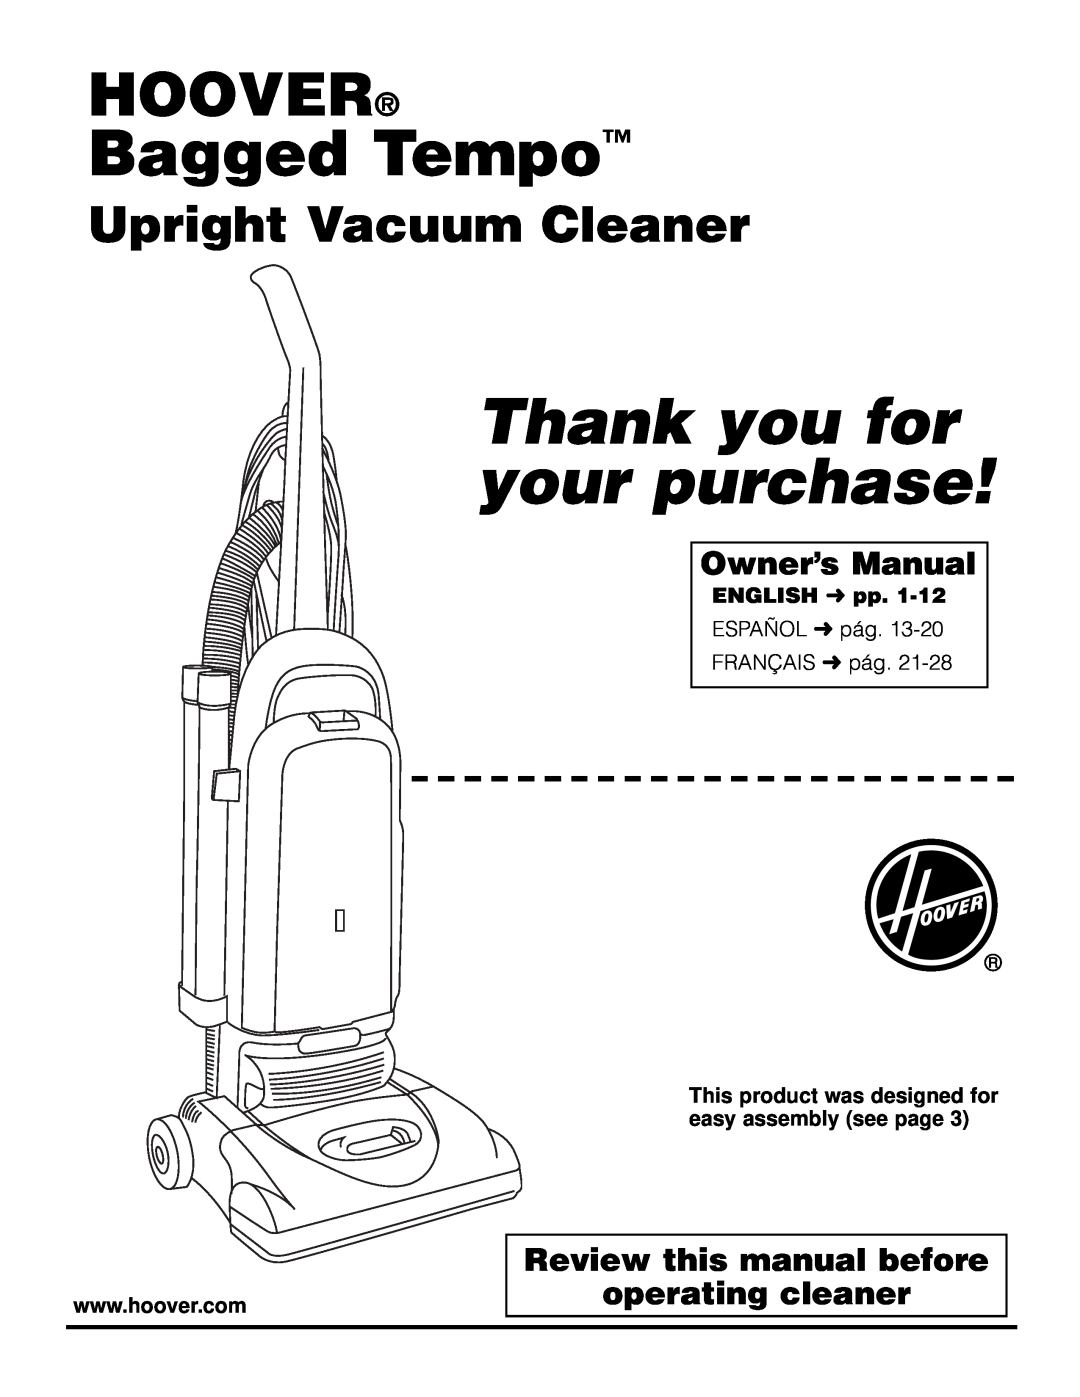 Hoover Bagged Tempo Upright Vacuum Cleaner owner manual Owner’s Manual, Review this manual before operating cleaner 